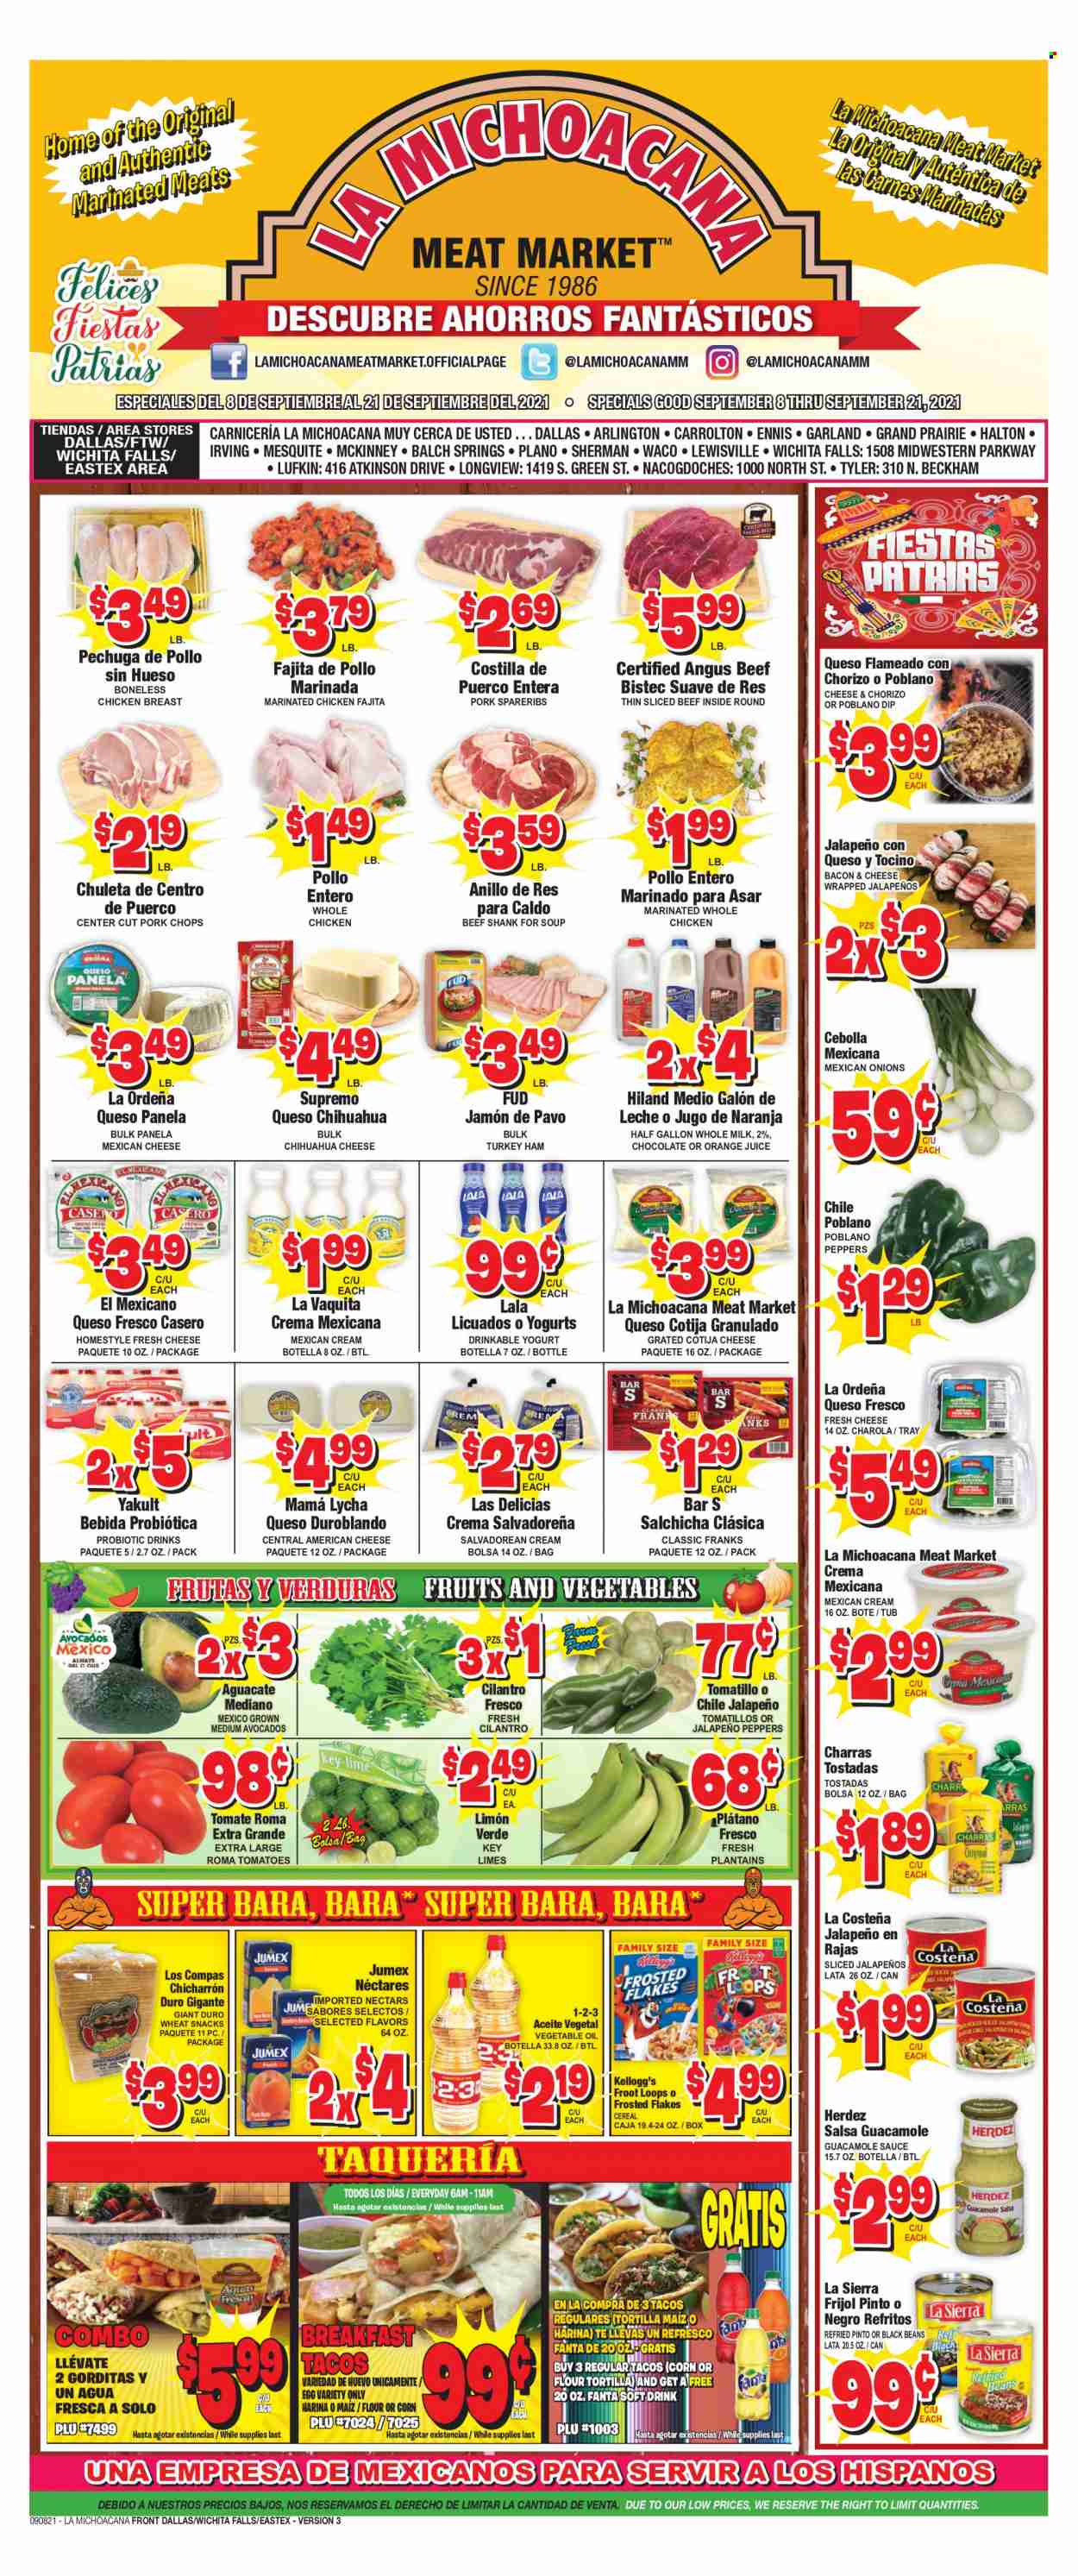 thumbnail - La Michoacana Meat Market Flyer - 09/08/2021 - 09/21/2021 - Sales products - tortillas, tostadas, tacos, beans, corn, tomatillo, tomatoes, limes, soup, sauce, fajita, bacon, ham, guacamole, american cheese, queso fresco, yoghurt, milk, eggs, dip, chocolate, snack, Kellogg's, black beans, cereals, Frosted Flakes, cilantro, salsa, vegetable oil, oil, orange juice, juice, Fanta, soft drink, whole chicken, chicken breasts, marinated chicken, beef meat, beef shank, pork chops, pork meat, pork spare ribs, Suave, bag, plantains. Page 1.